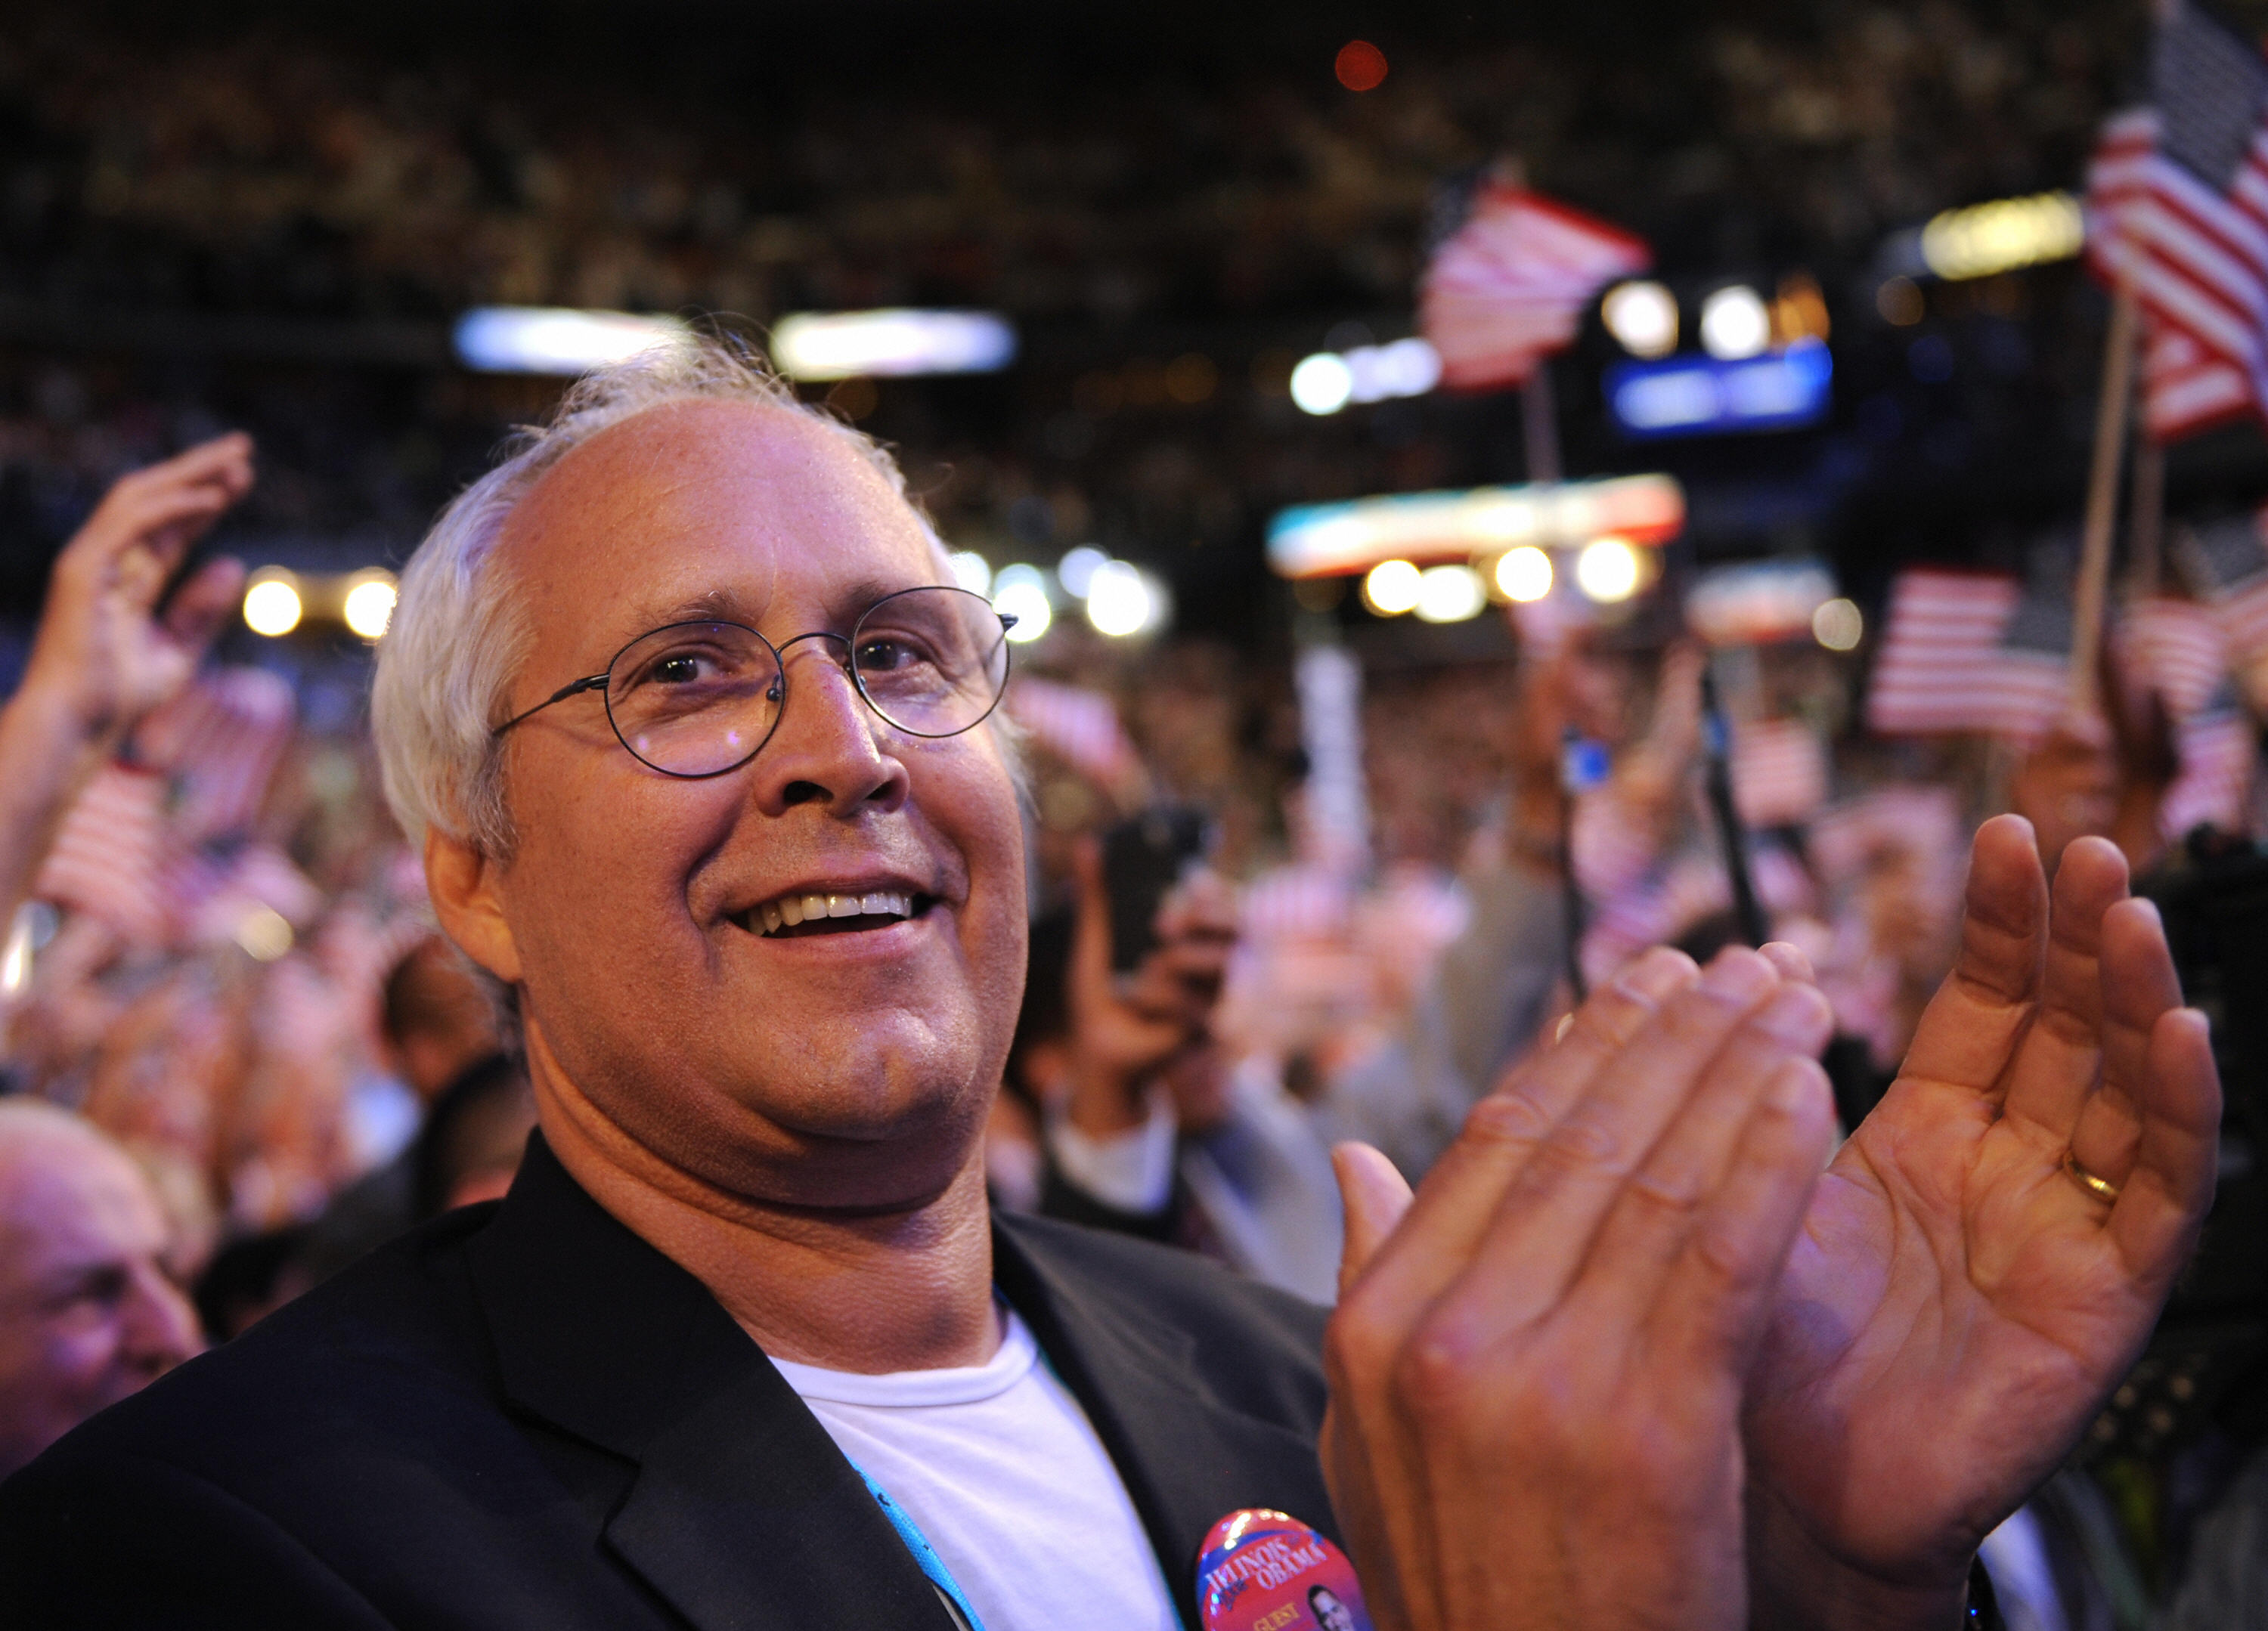 Chevy Chase is clapping while in an audience.